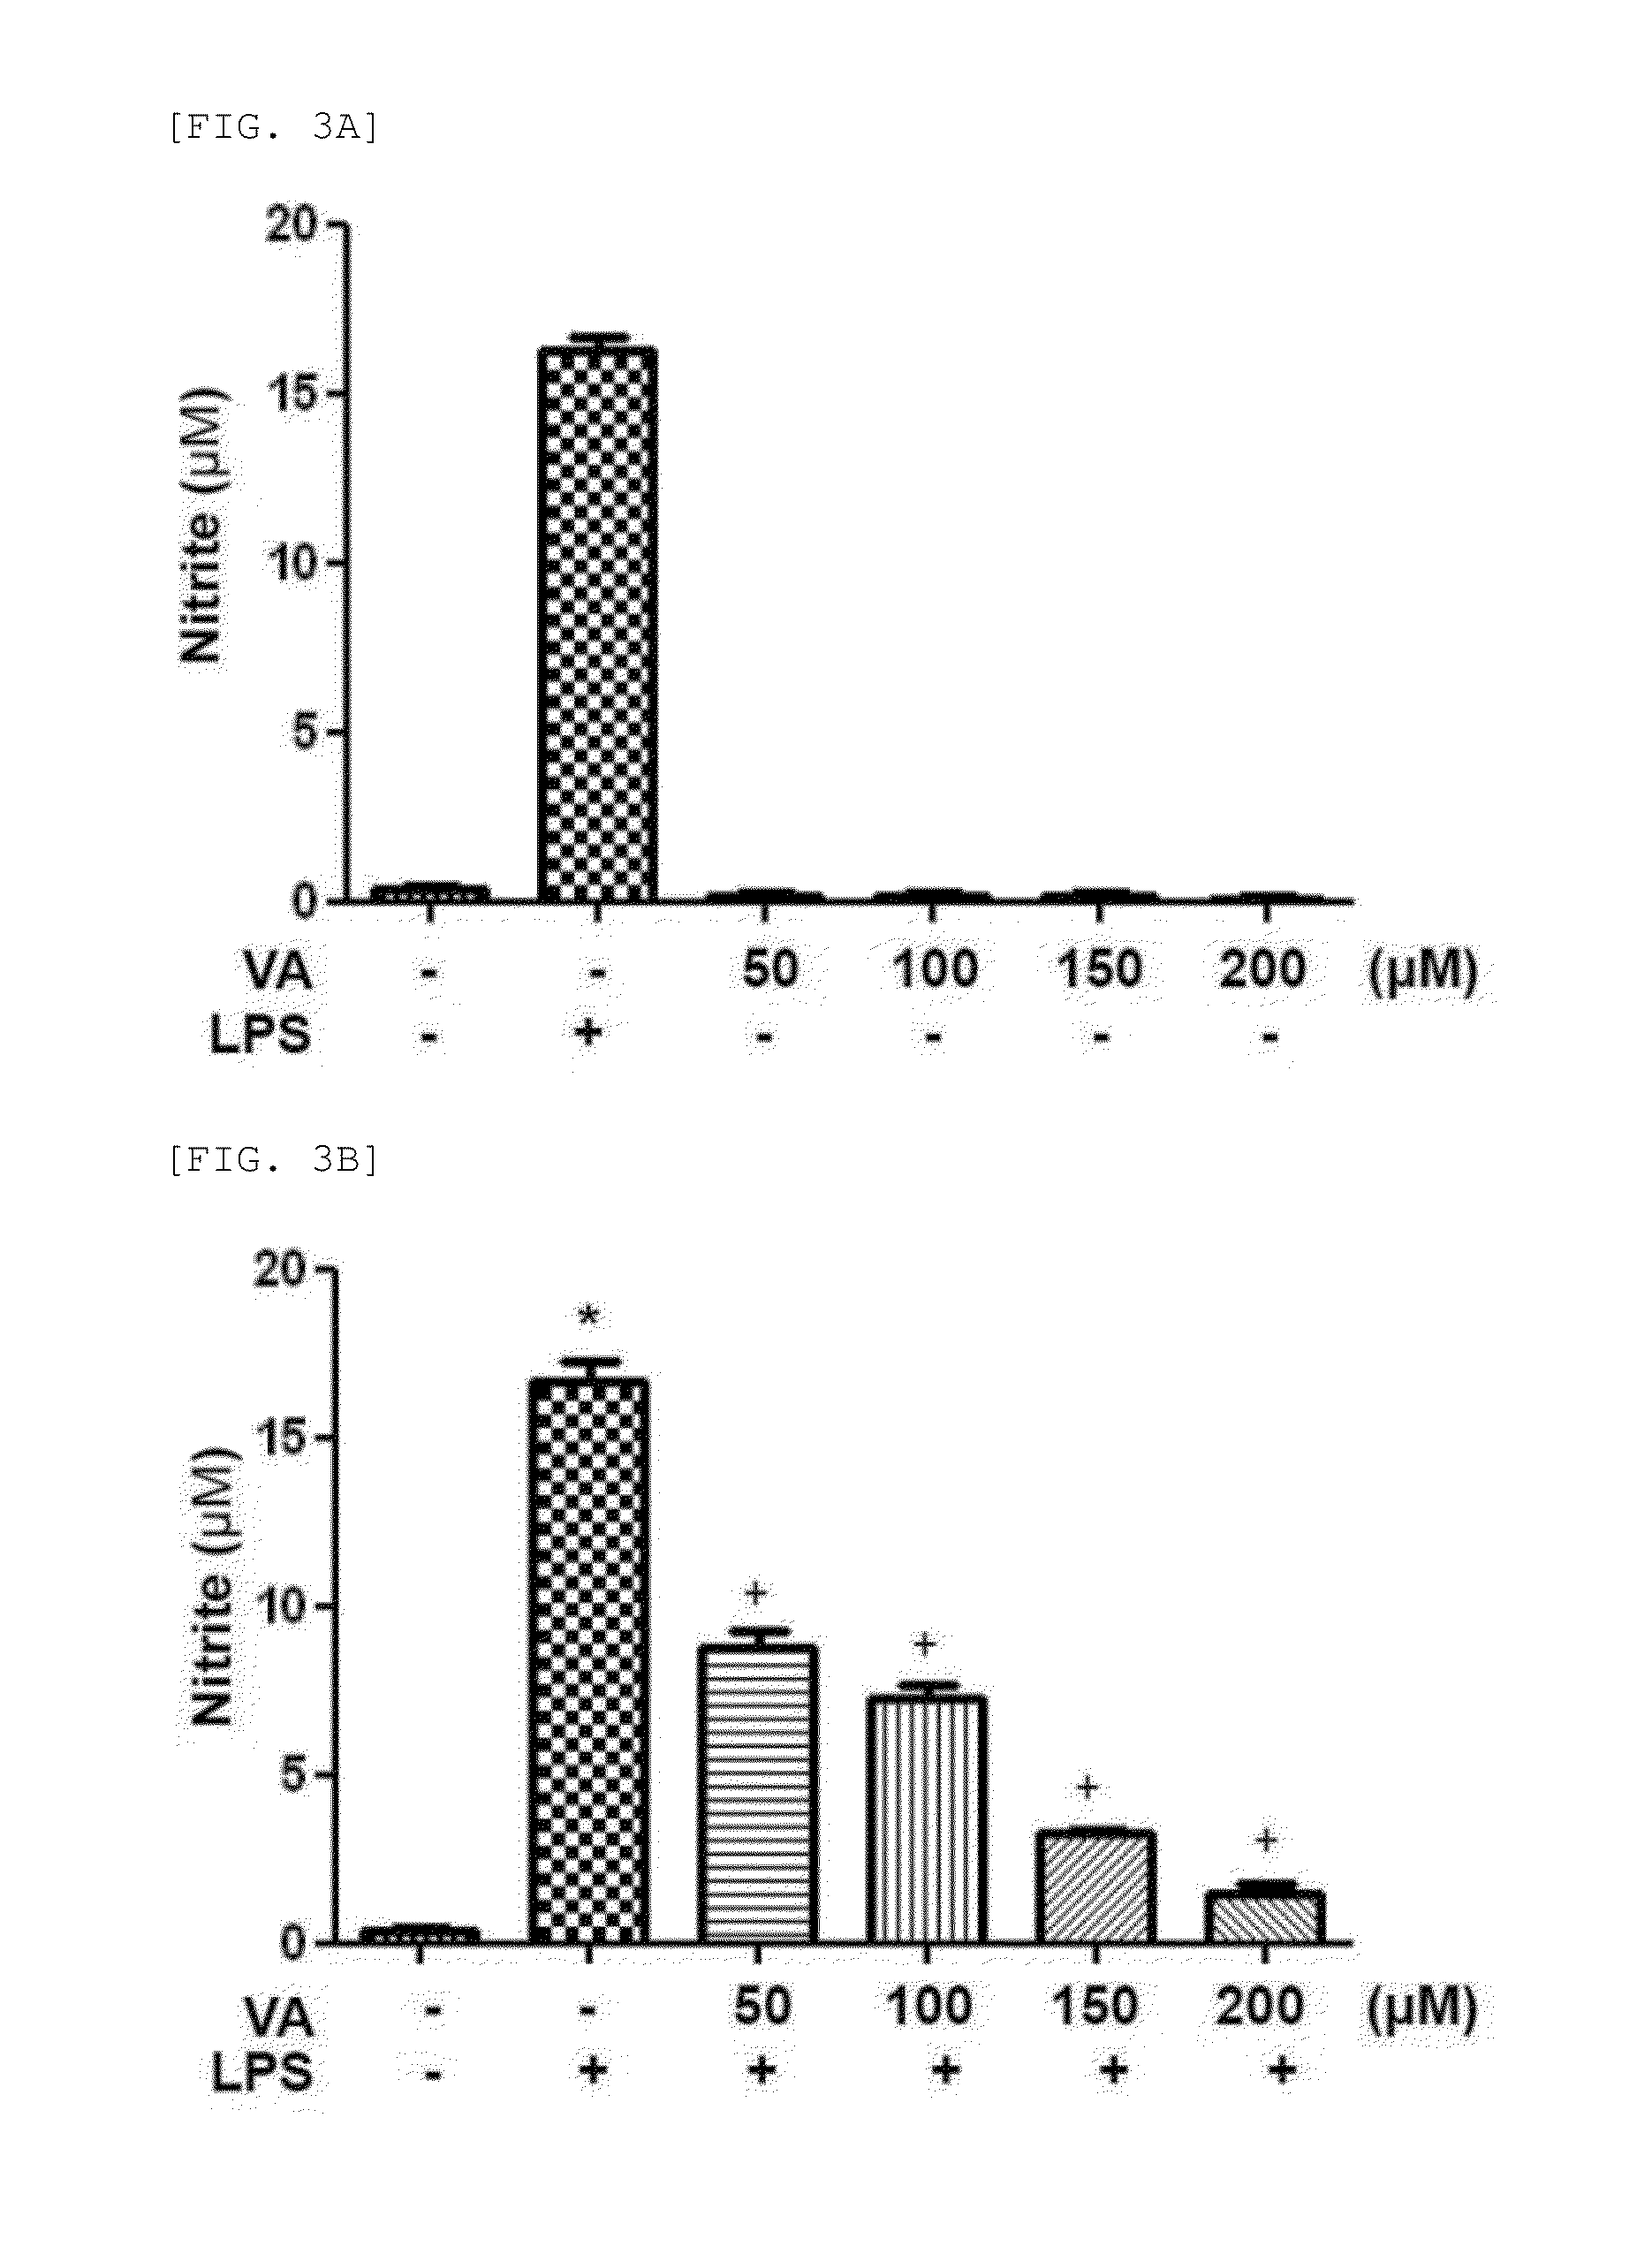 Composition for preventing or treating inflammatory diseases comprising veratric acid as effective component